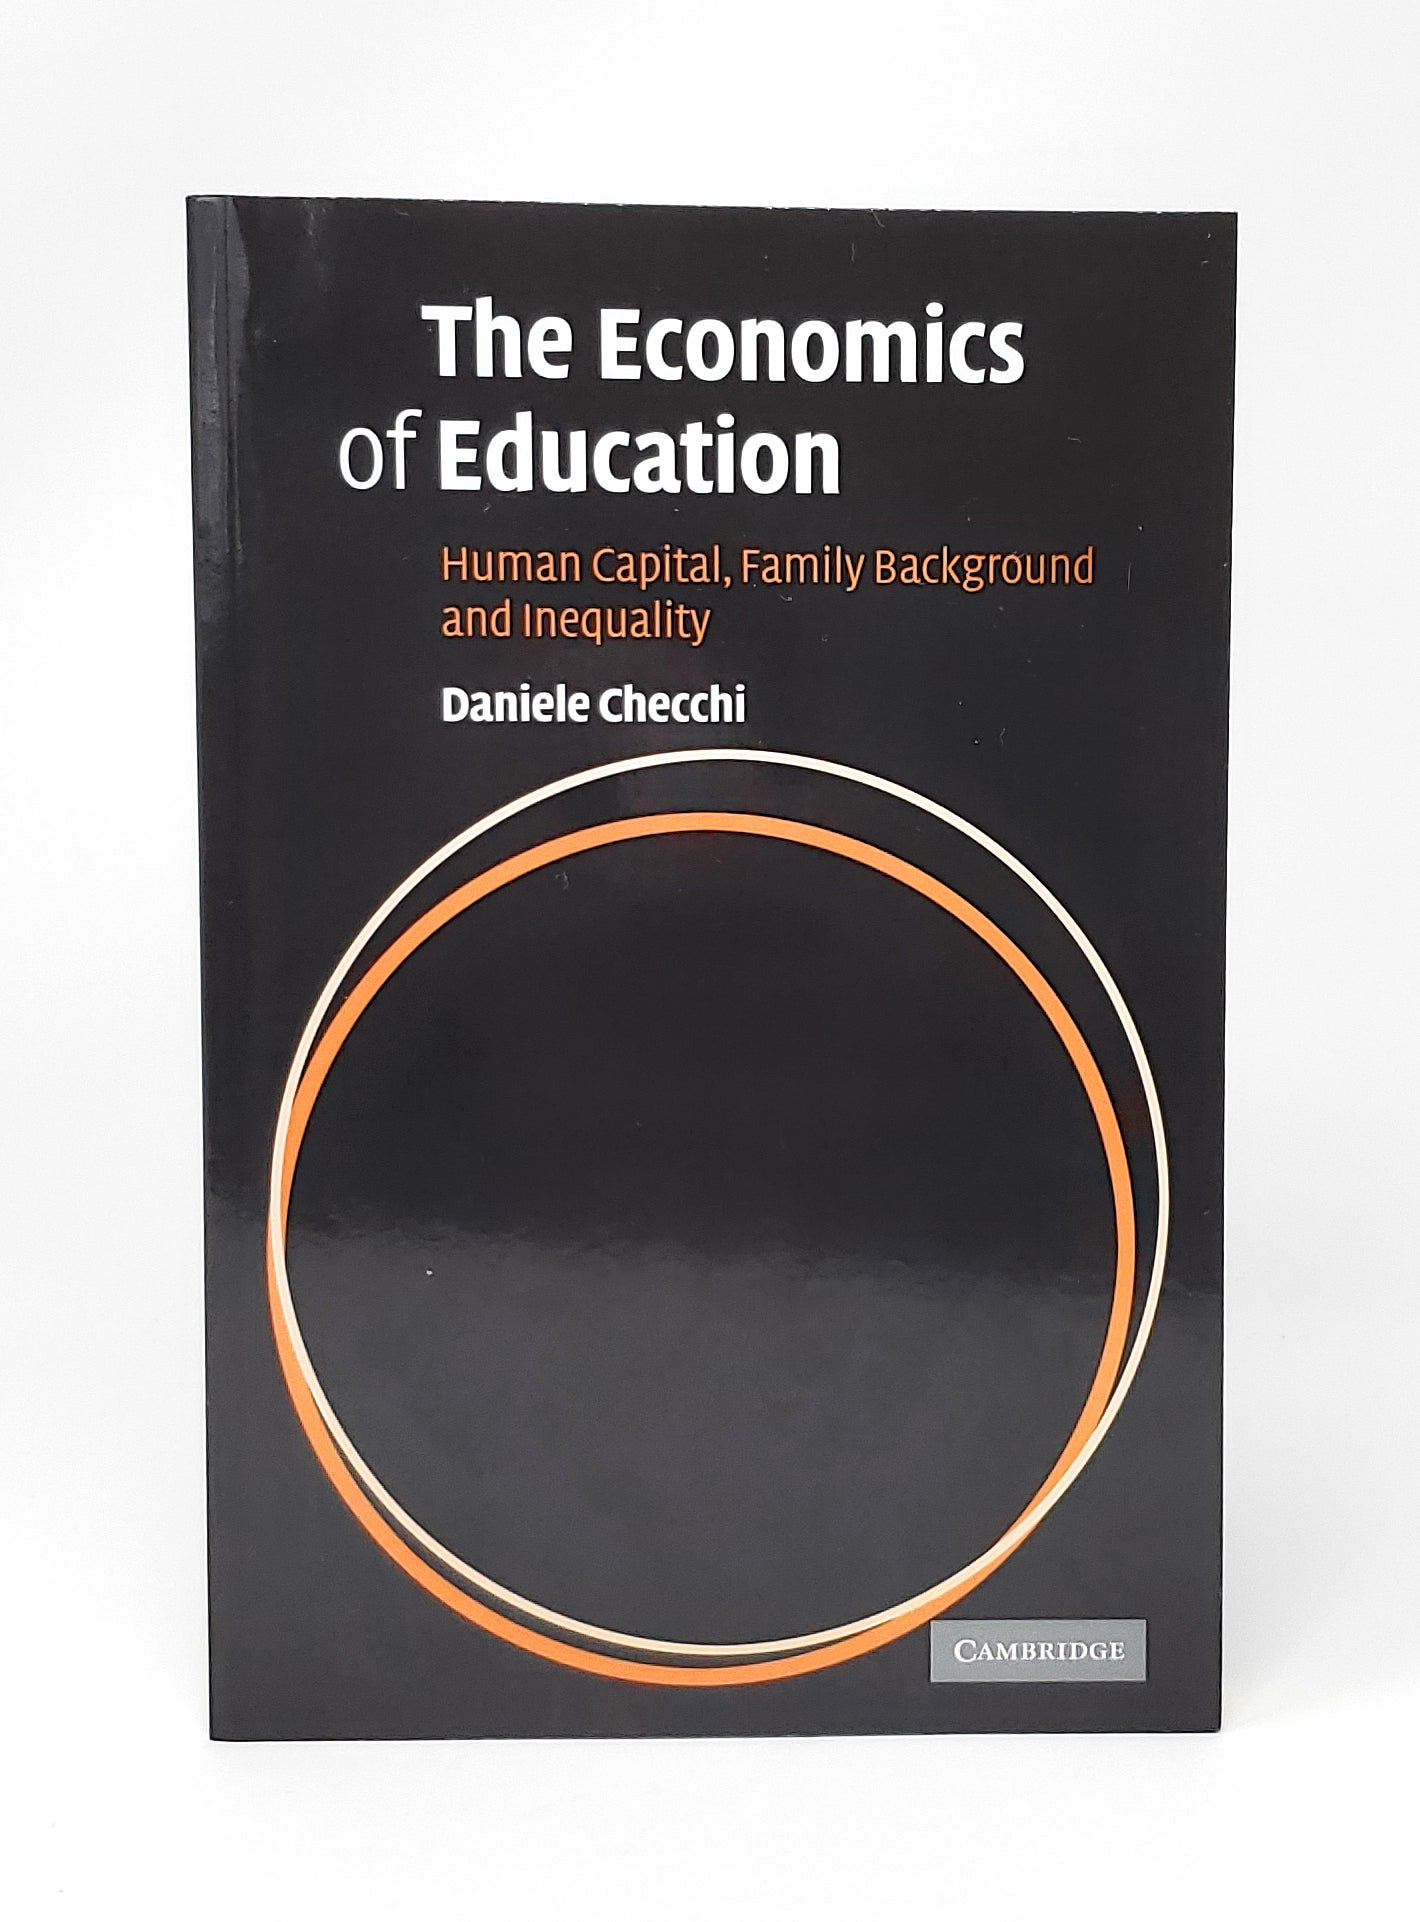 Family　and　of　The　Daniele　Checchi　Economics　Capital,　Background　Education:　Human　Inequality